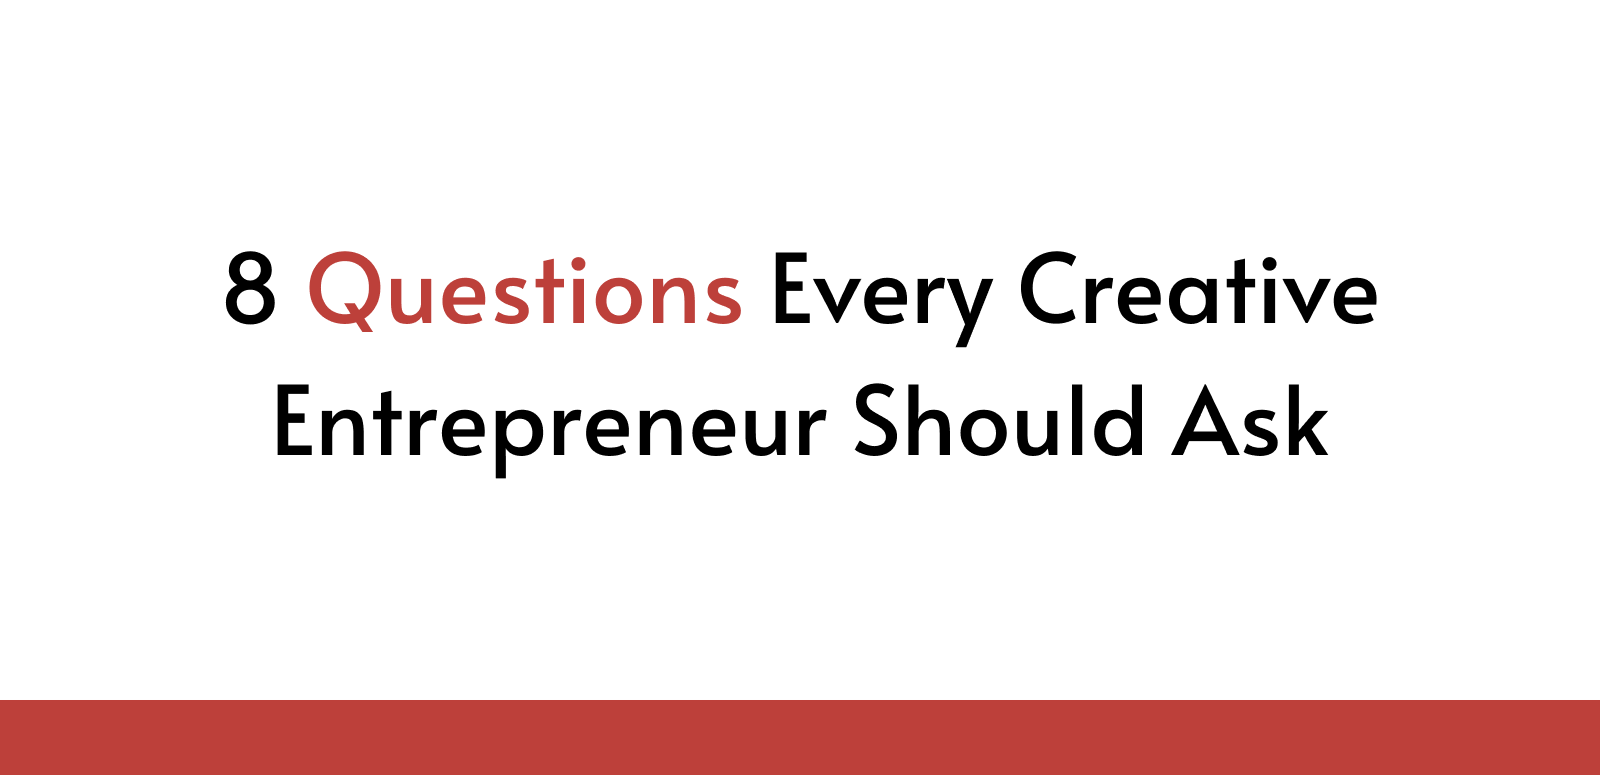 8 Questions Every Creative Entrepreneur Should Ask